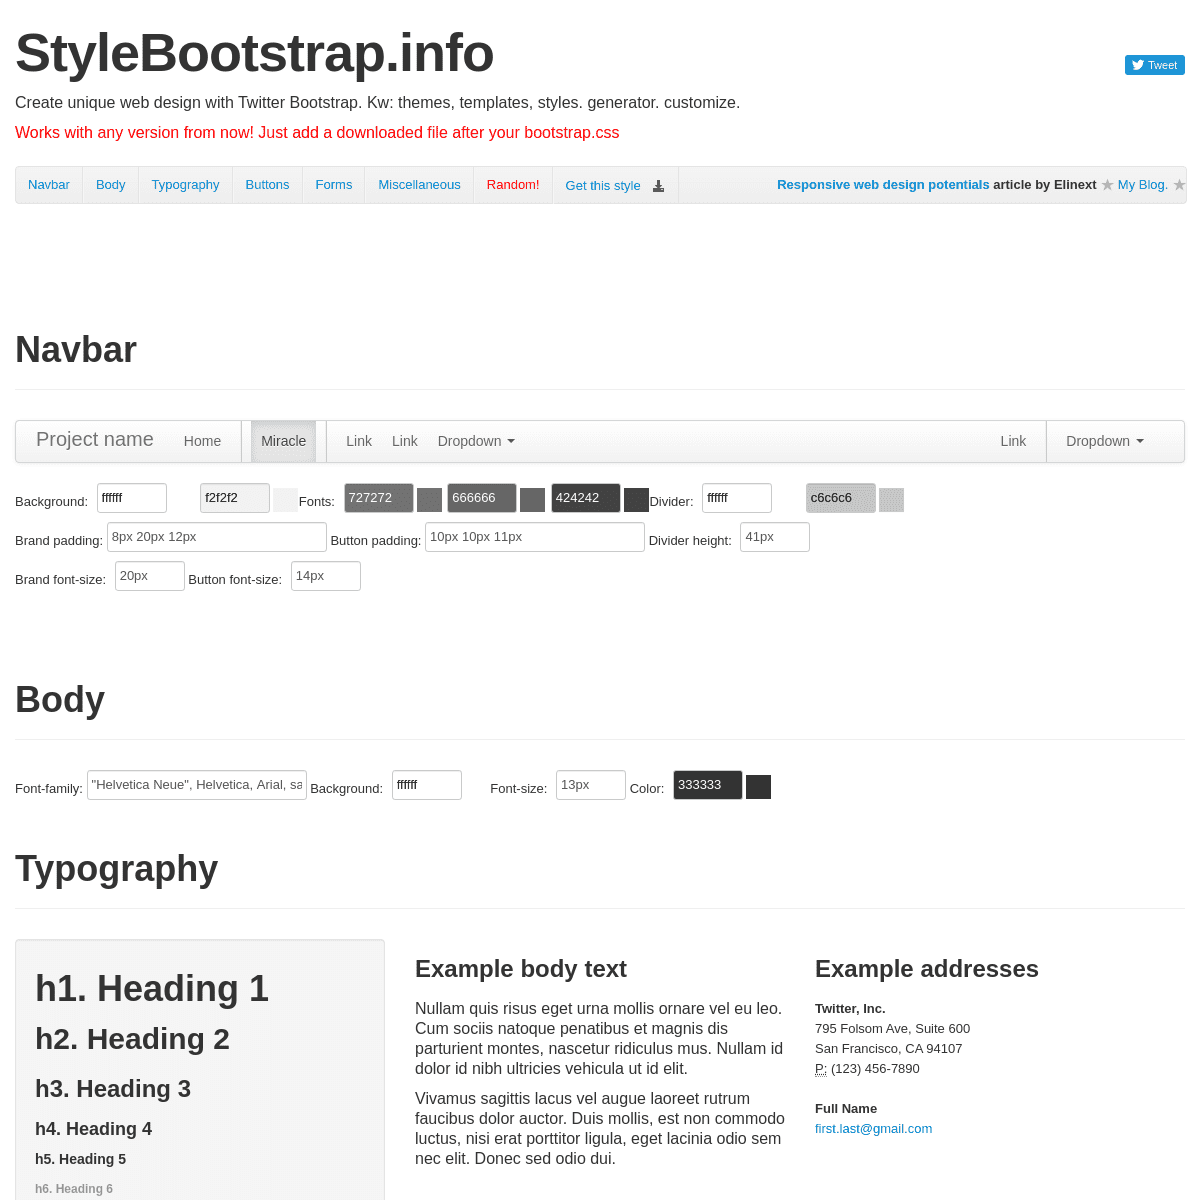 A complete backup of https://stylebootstrap.info